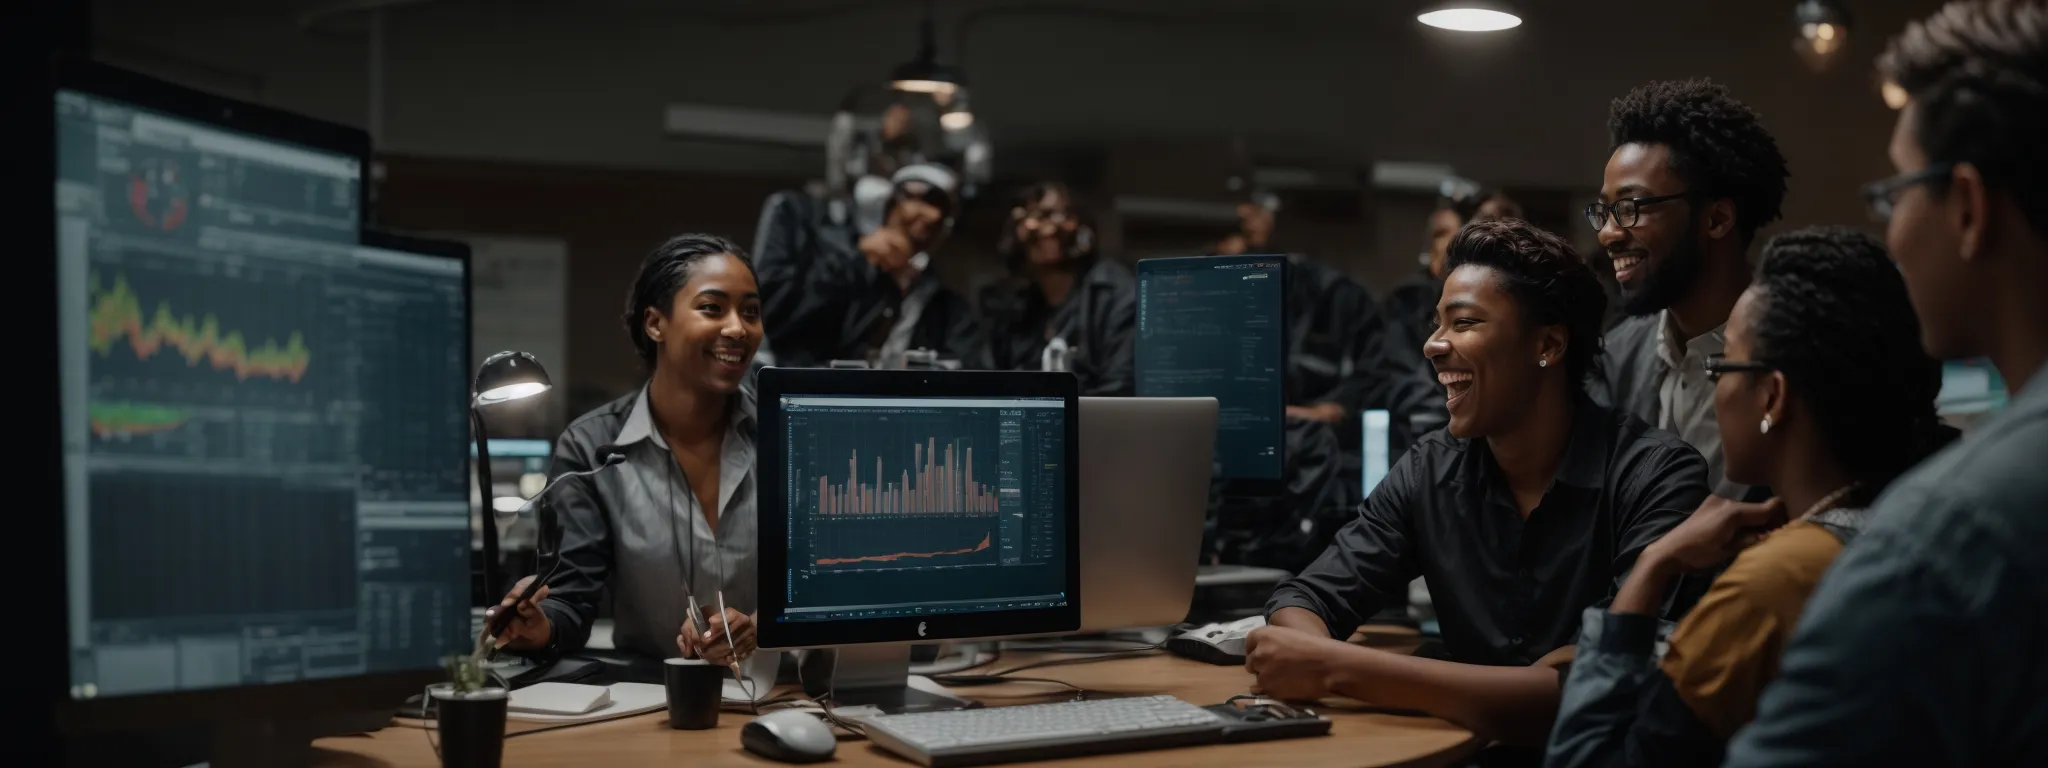 a diverse team gathers around a computer, visibly excited as they observe rising analytics charts indicative of improved seo performance.